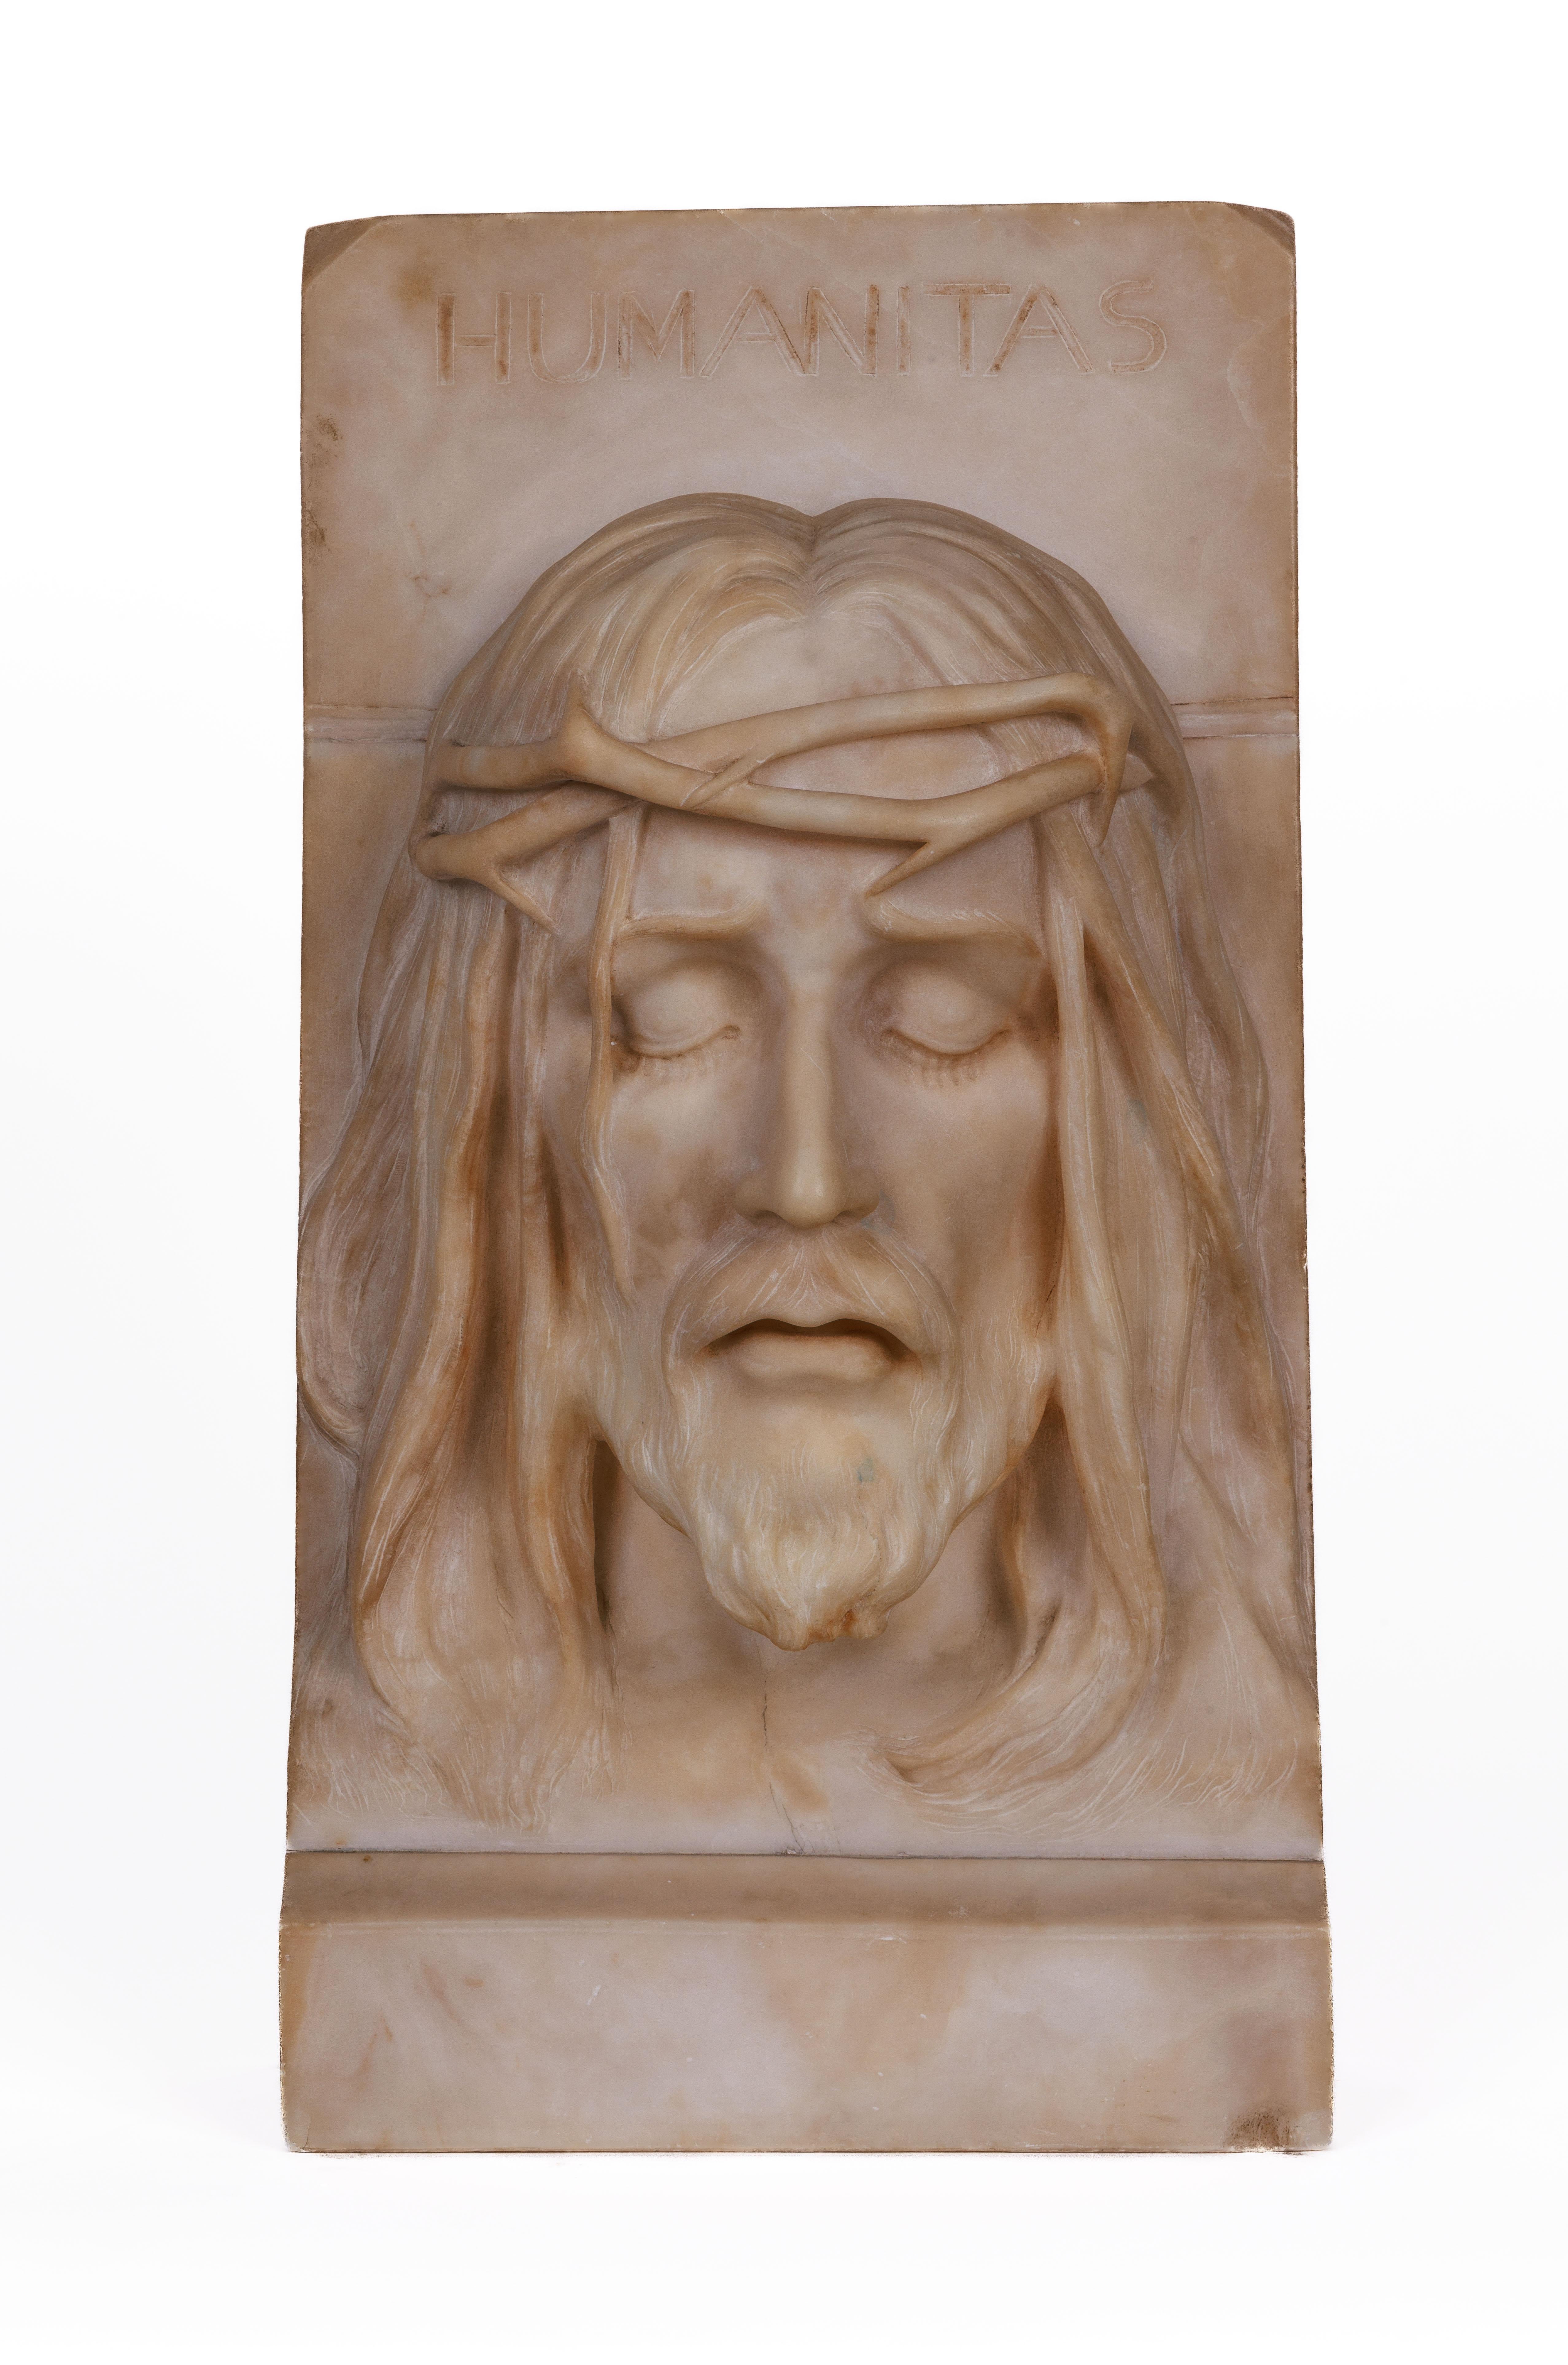 A rare and important Italian alabaster bust sculpture of Jesus Christ, C. 1860

A modeled bust of Holy Christ wearing a crown of thorns, exceptionally and realistically hand-carved in Rome in around 1860 inscribed 